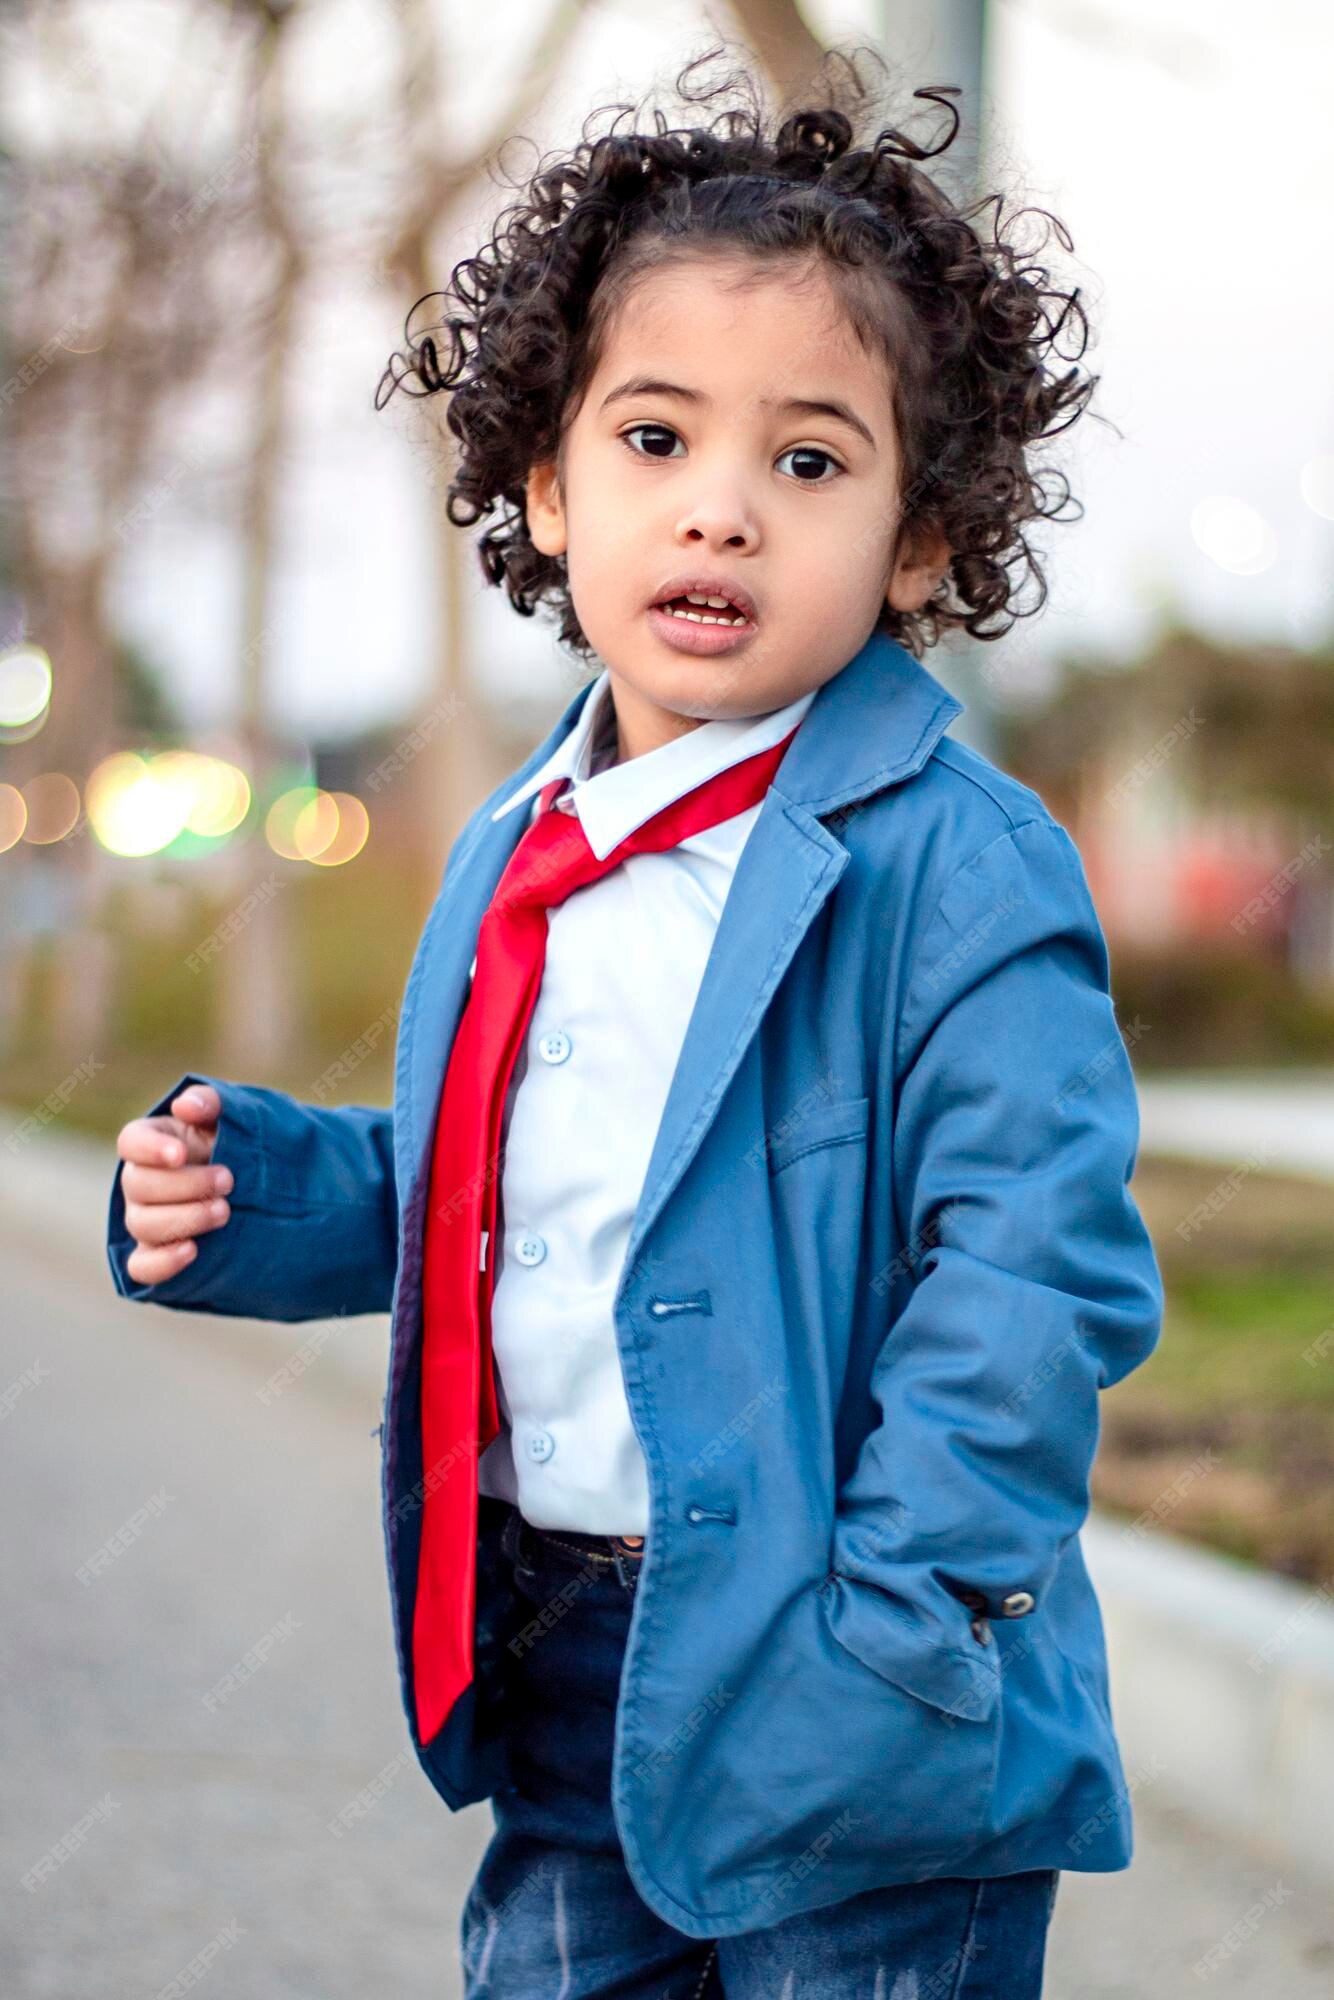 Premium Photo | A naughty and handsome little boy, with long hair,  elegantly dressed and his hand in his pocket